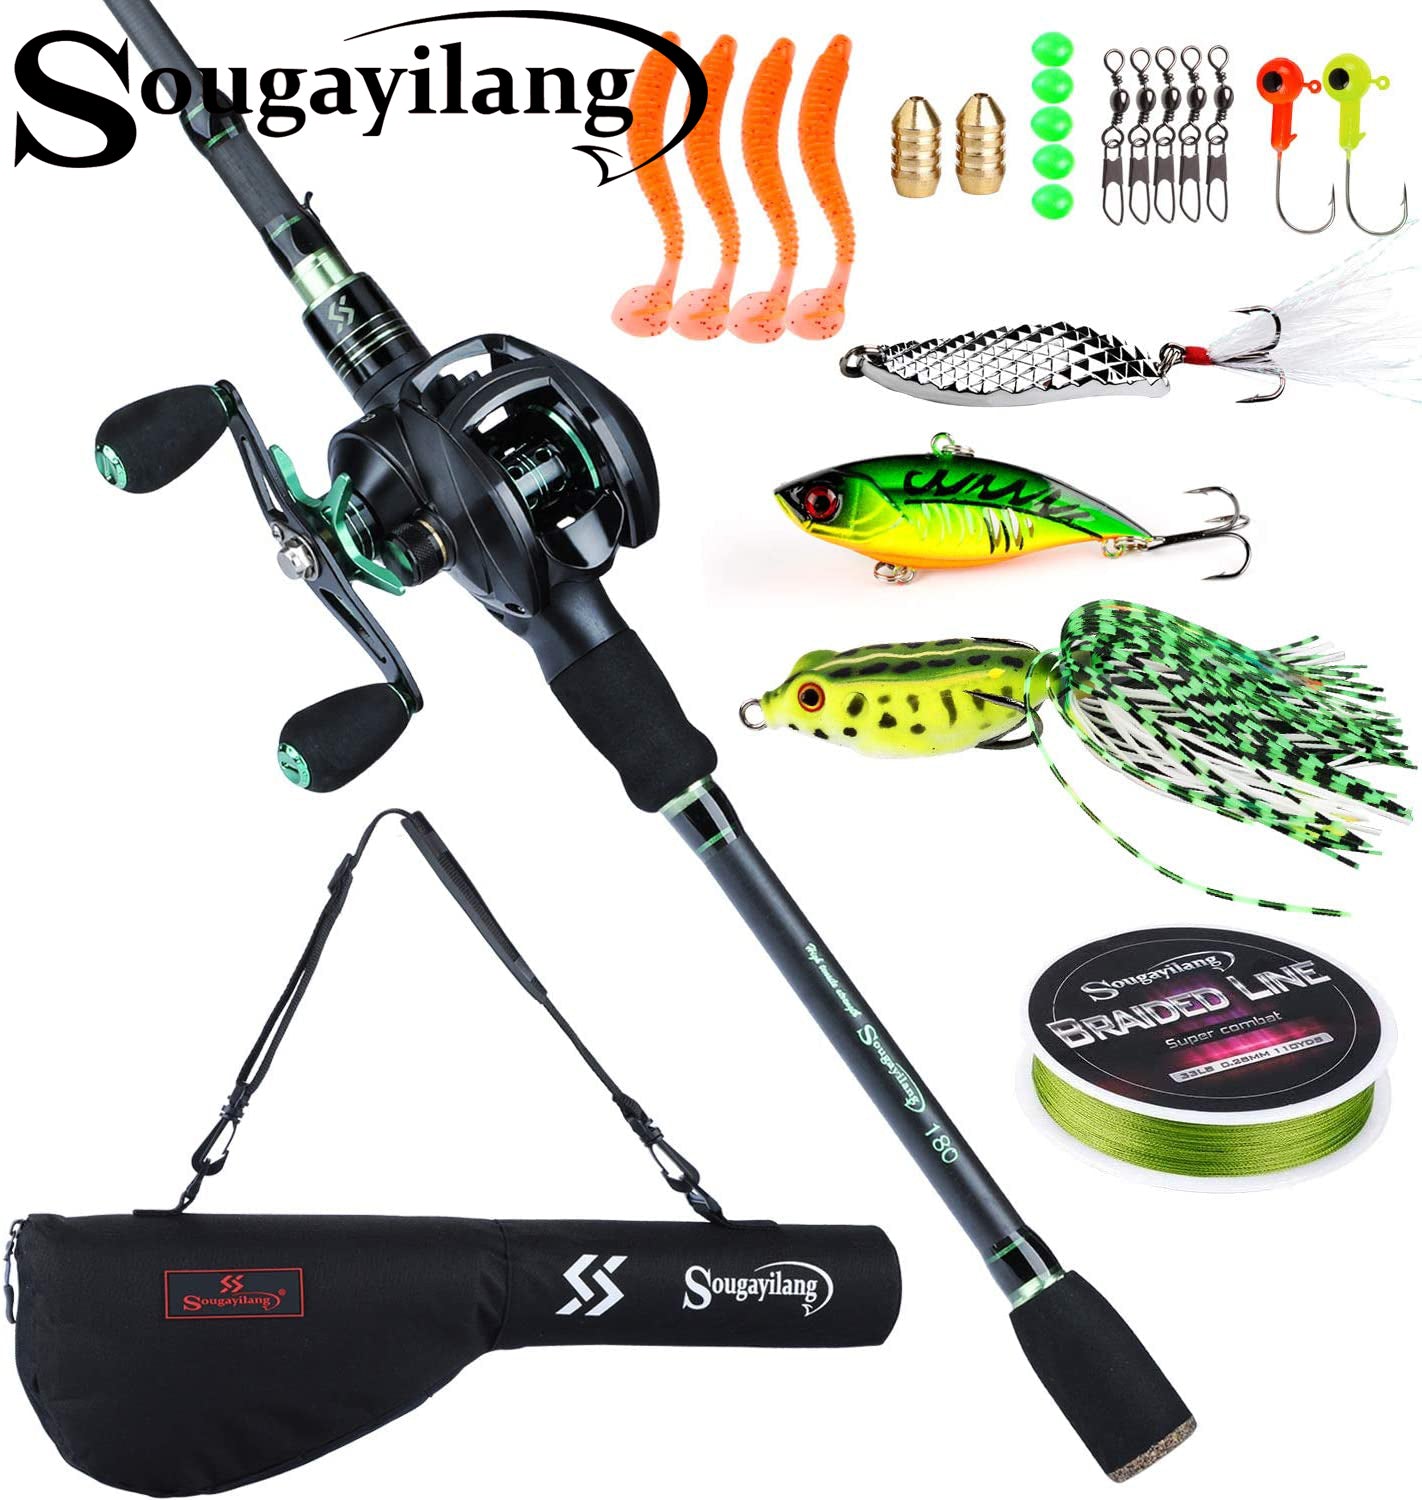 Sougayilang Speed Bass Fishing Rods, Porable Light Weight High Carbon 4 Pc  Blanks for Travel Freshwater Fishing-Spinning & Casting, Rod & Reel Combos